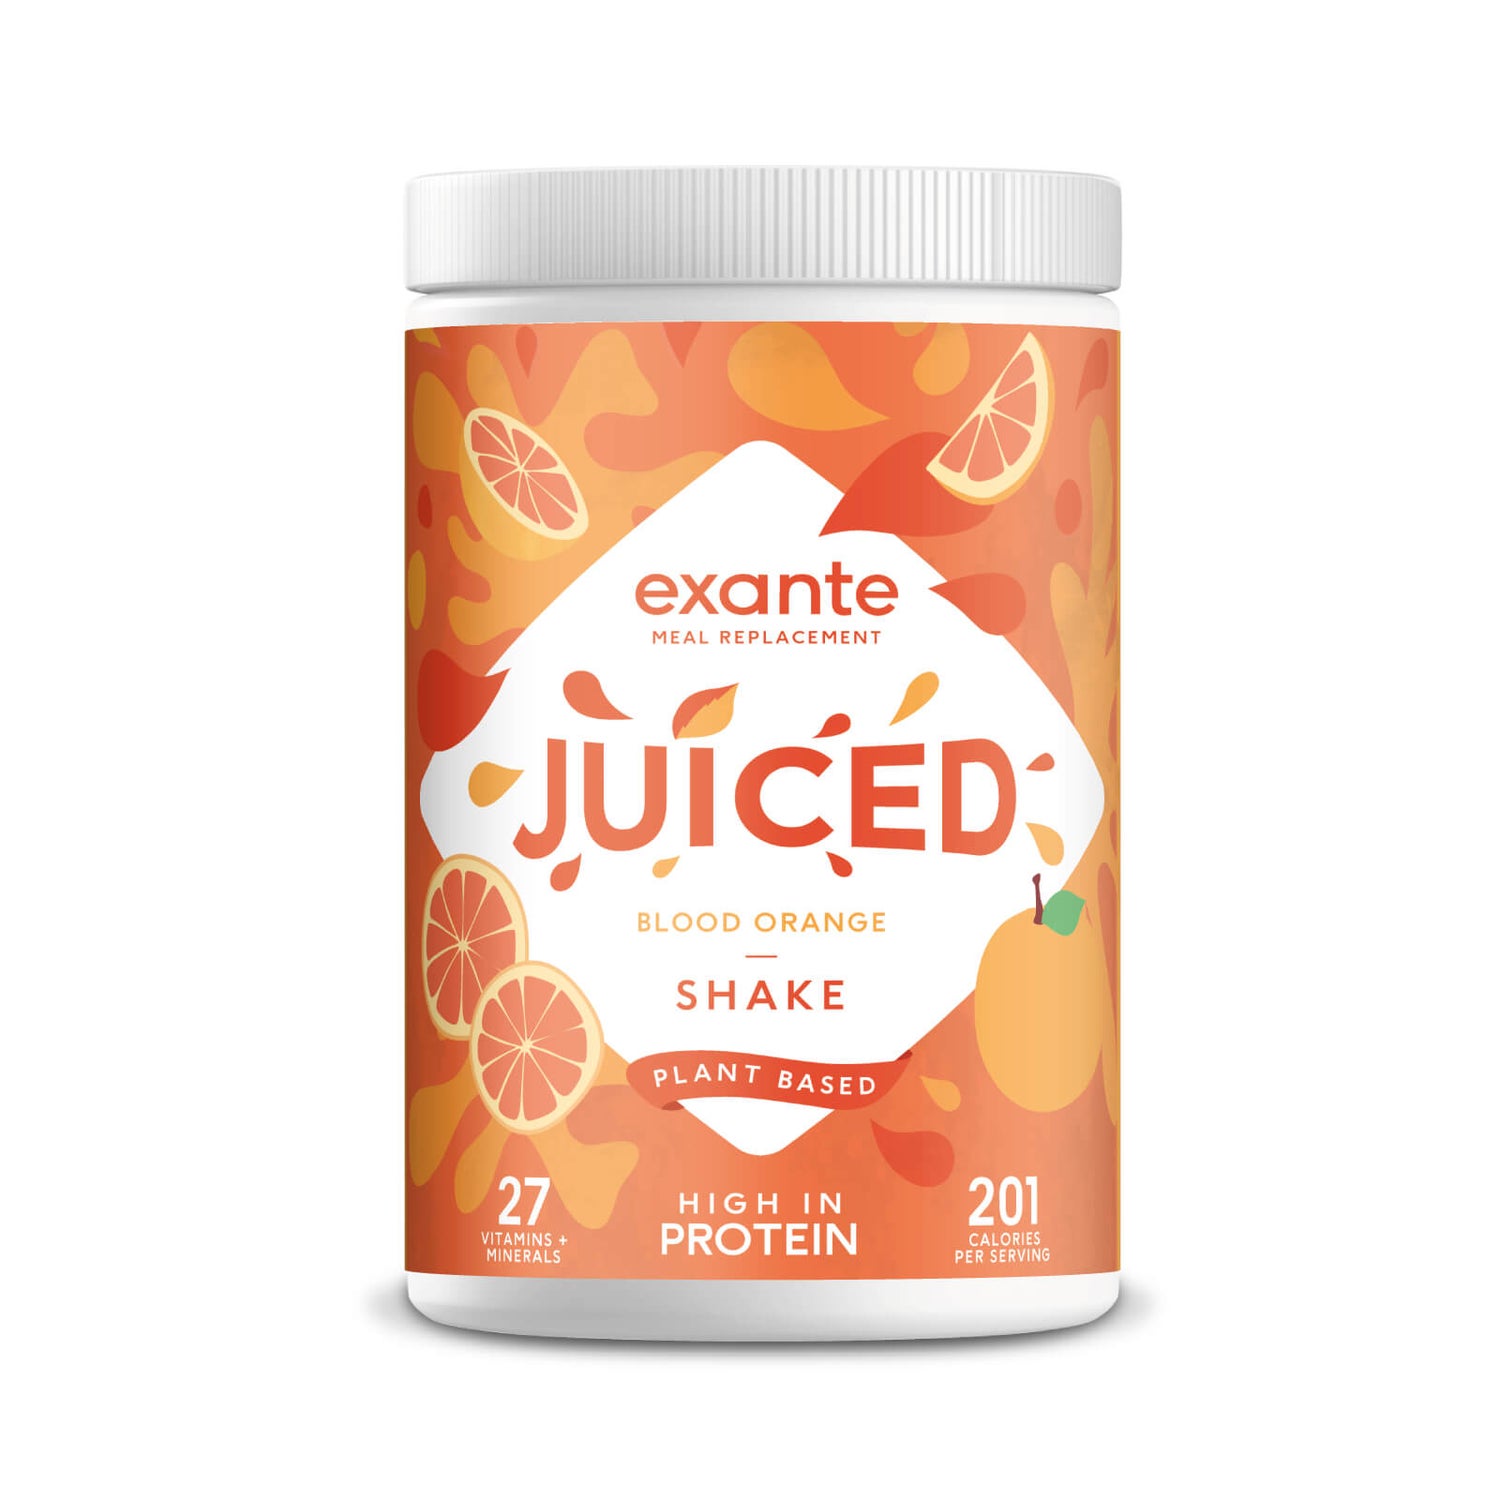 Plant Based JUICED Meal Replacement Shake